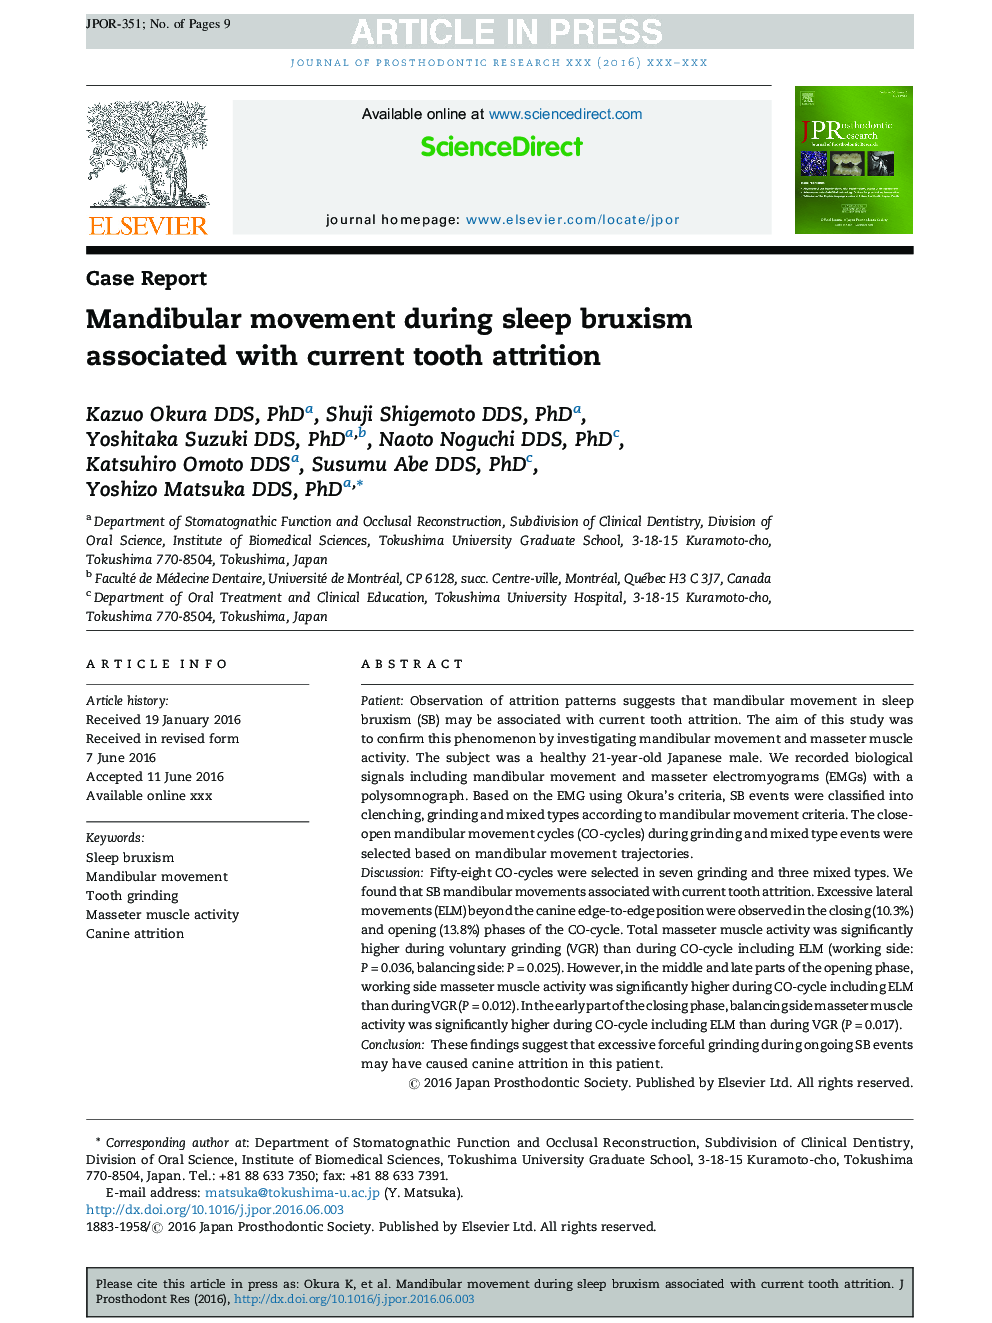 Mandibular movement during sleep bruxism associated with current tooth attrition